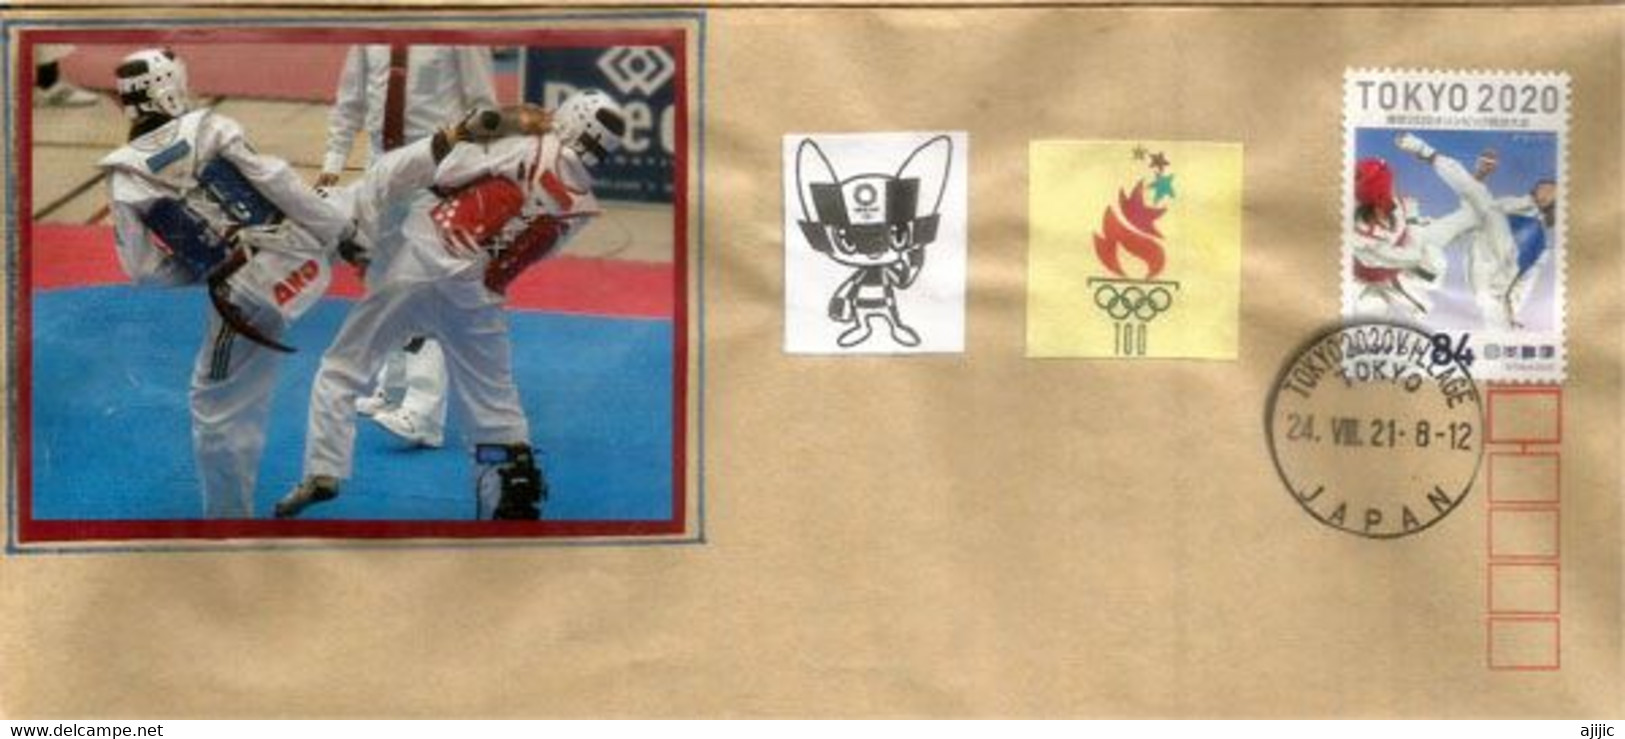 TAEKWONDO In TOKYO OLYMPICS 2020, (RARE-SCARCE LETTER FROM TOKYO OLYMPIC VILLAGE POST-OFFICE) - Sommer 2020: Tokio